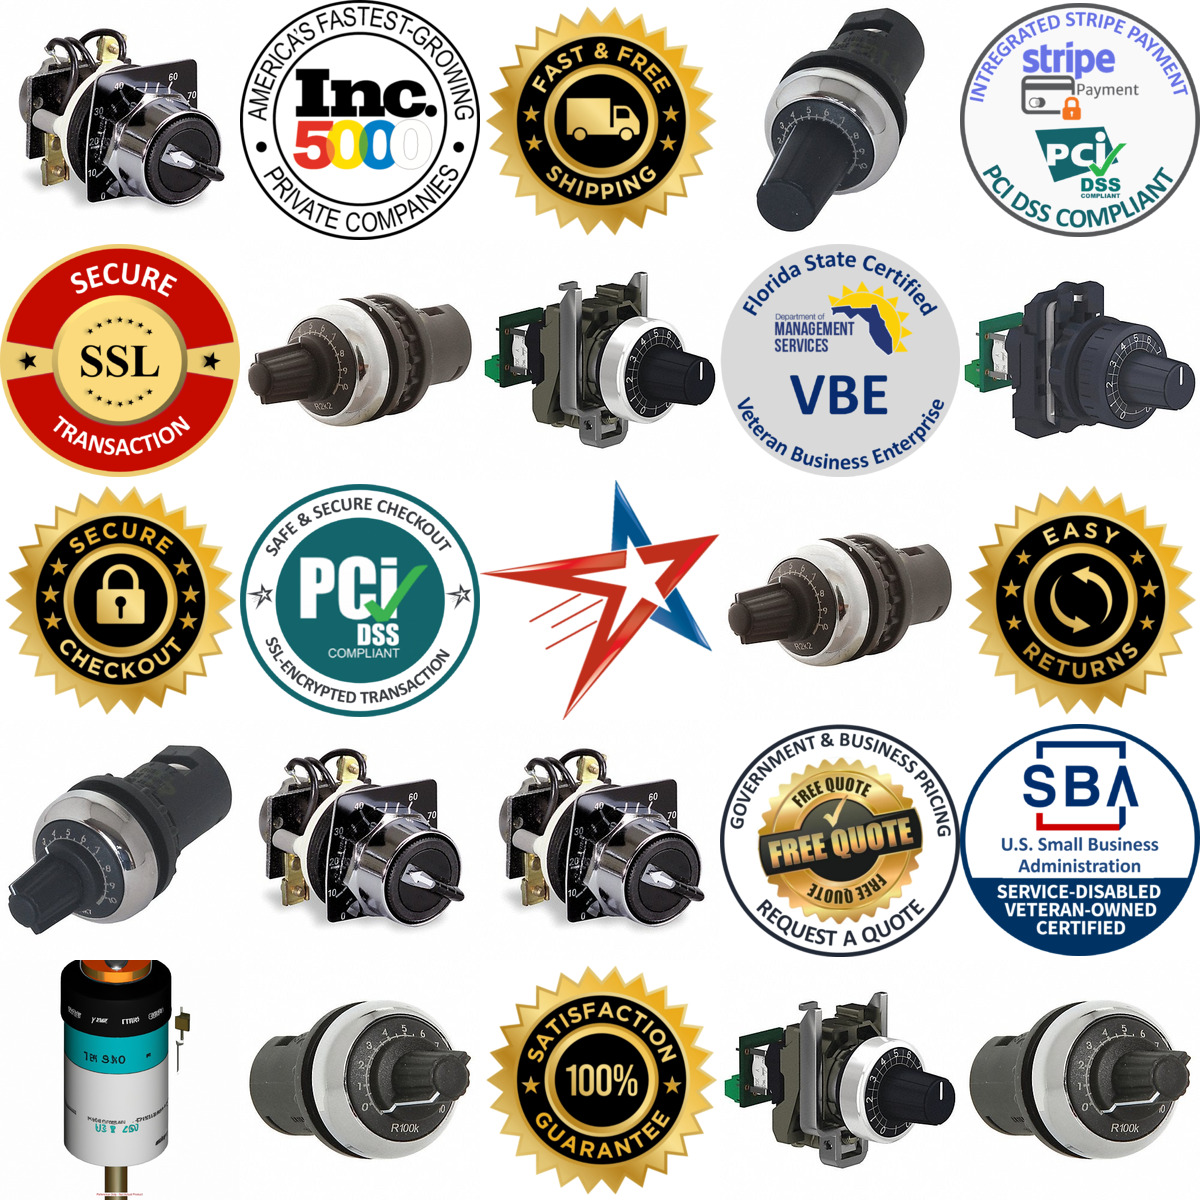 A selection of Potentiometers products on GoVets